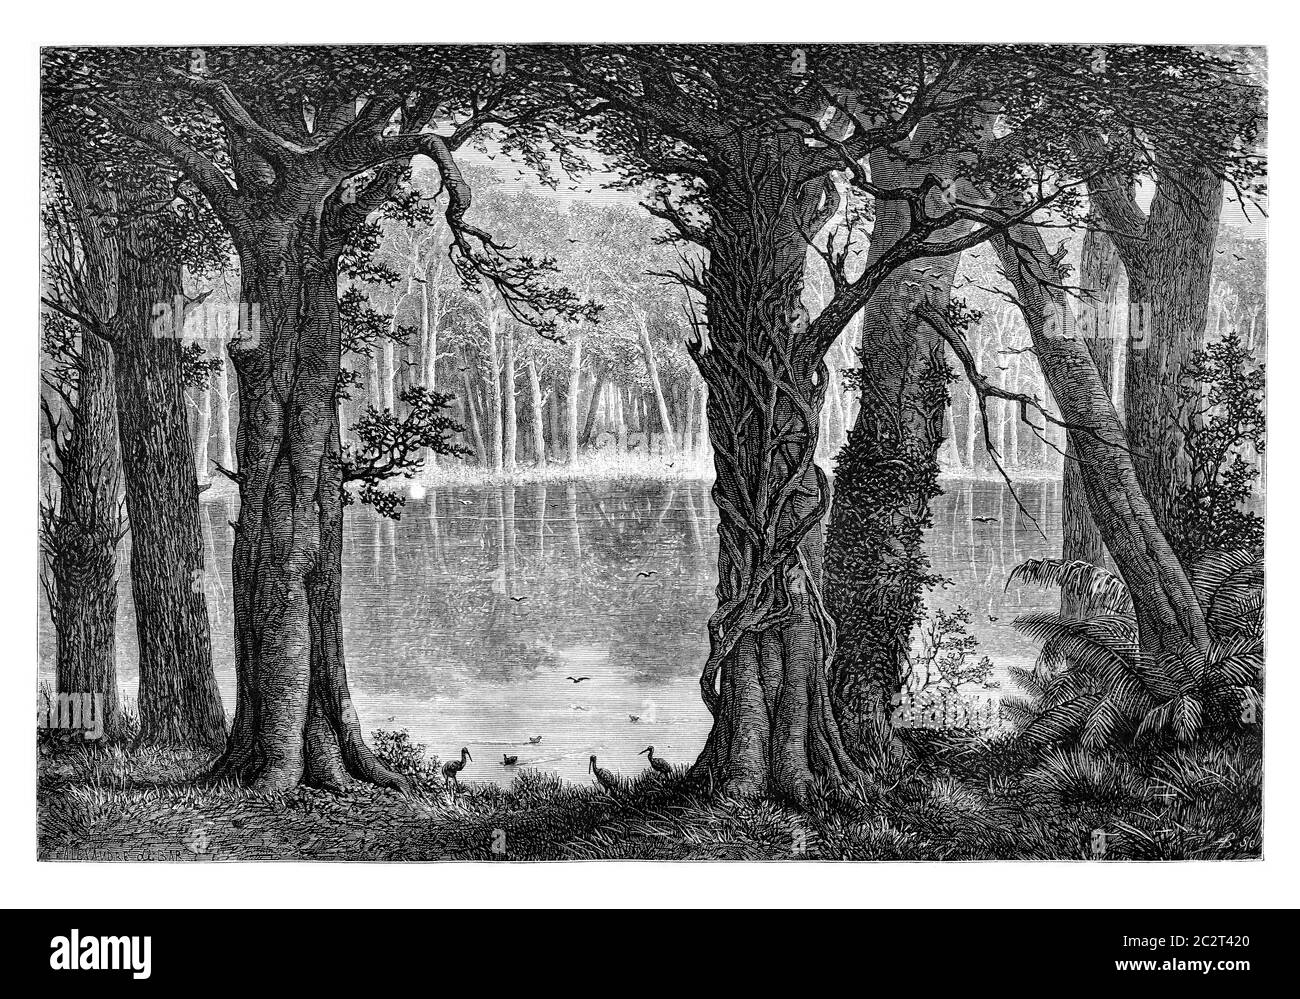 Lake Ligouri, in Angola, Southern Africa, drawing by De Bar based on the English edition, vintage illustration. Le Tour du Monde, Travel Journal, 1881 Stock Photo